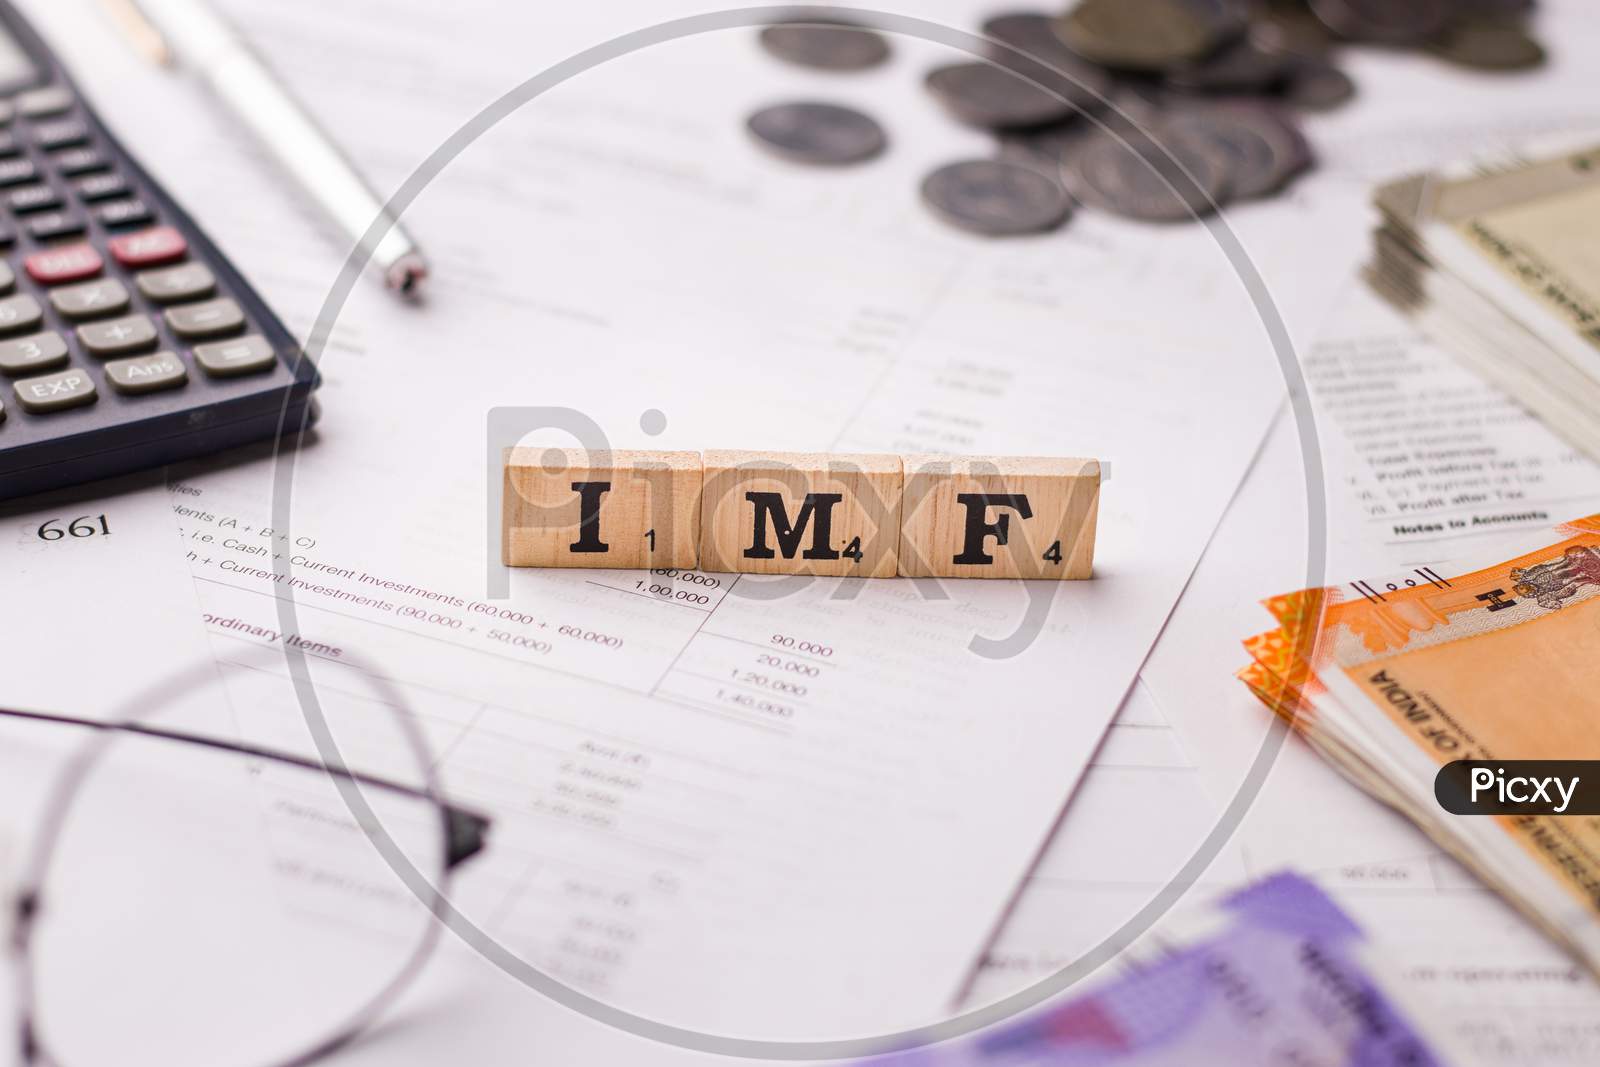 Assam, india - March 30, 2021 : Word IMF written on wooden cubes stock image.